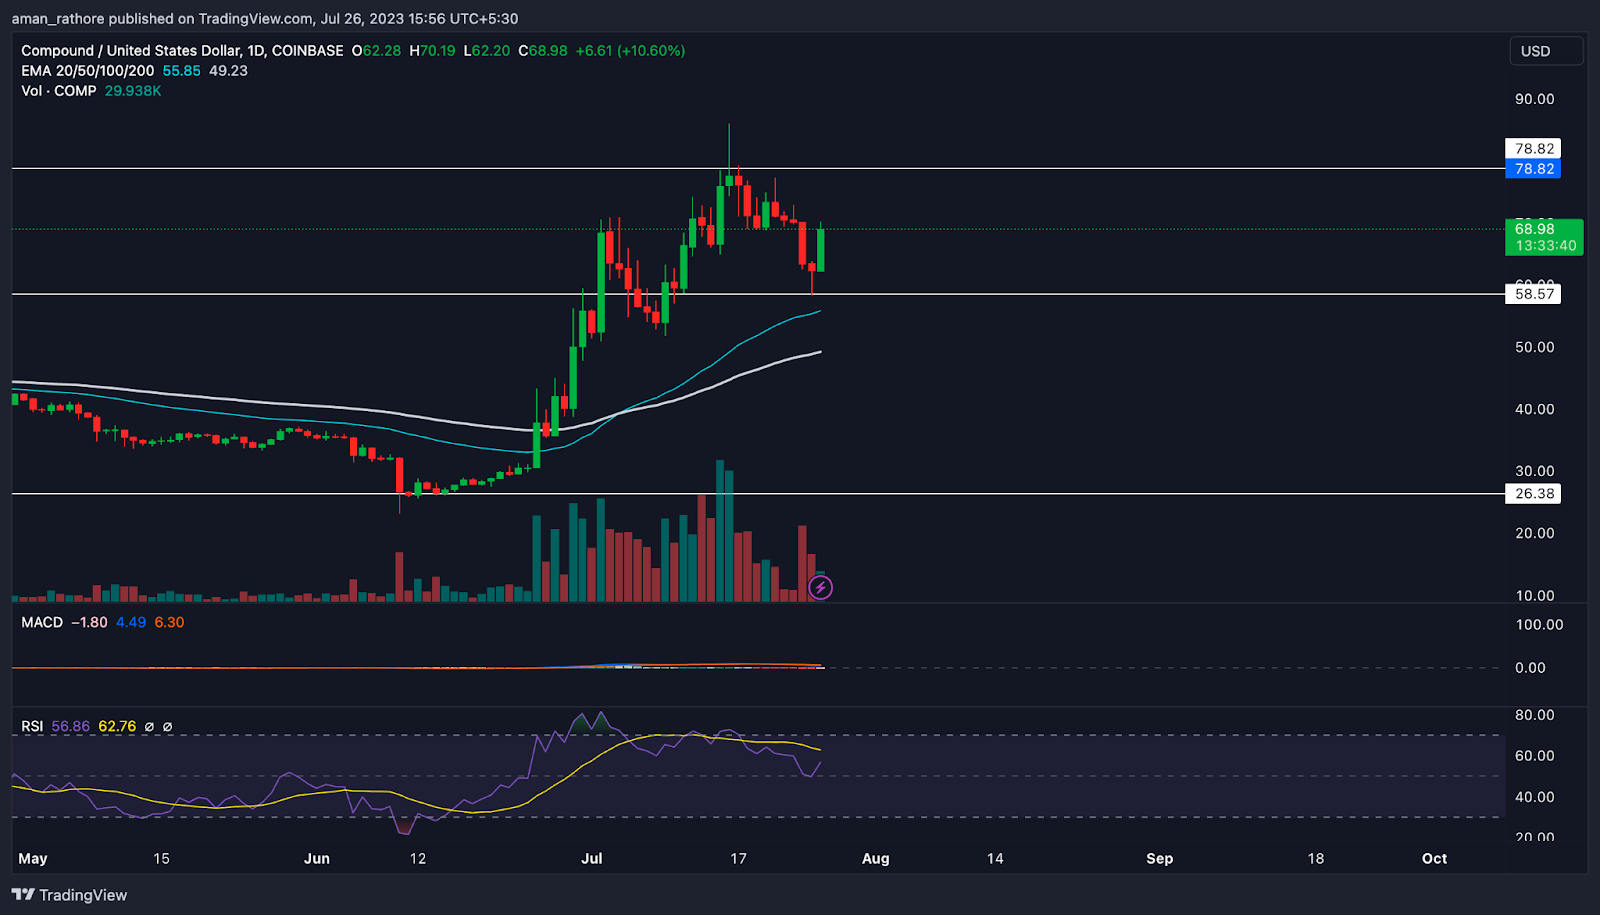 Compound Price Prediction: Will COMP Rebound From Here?